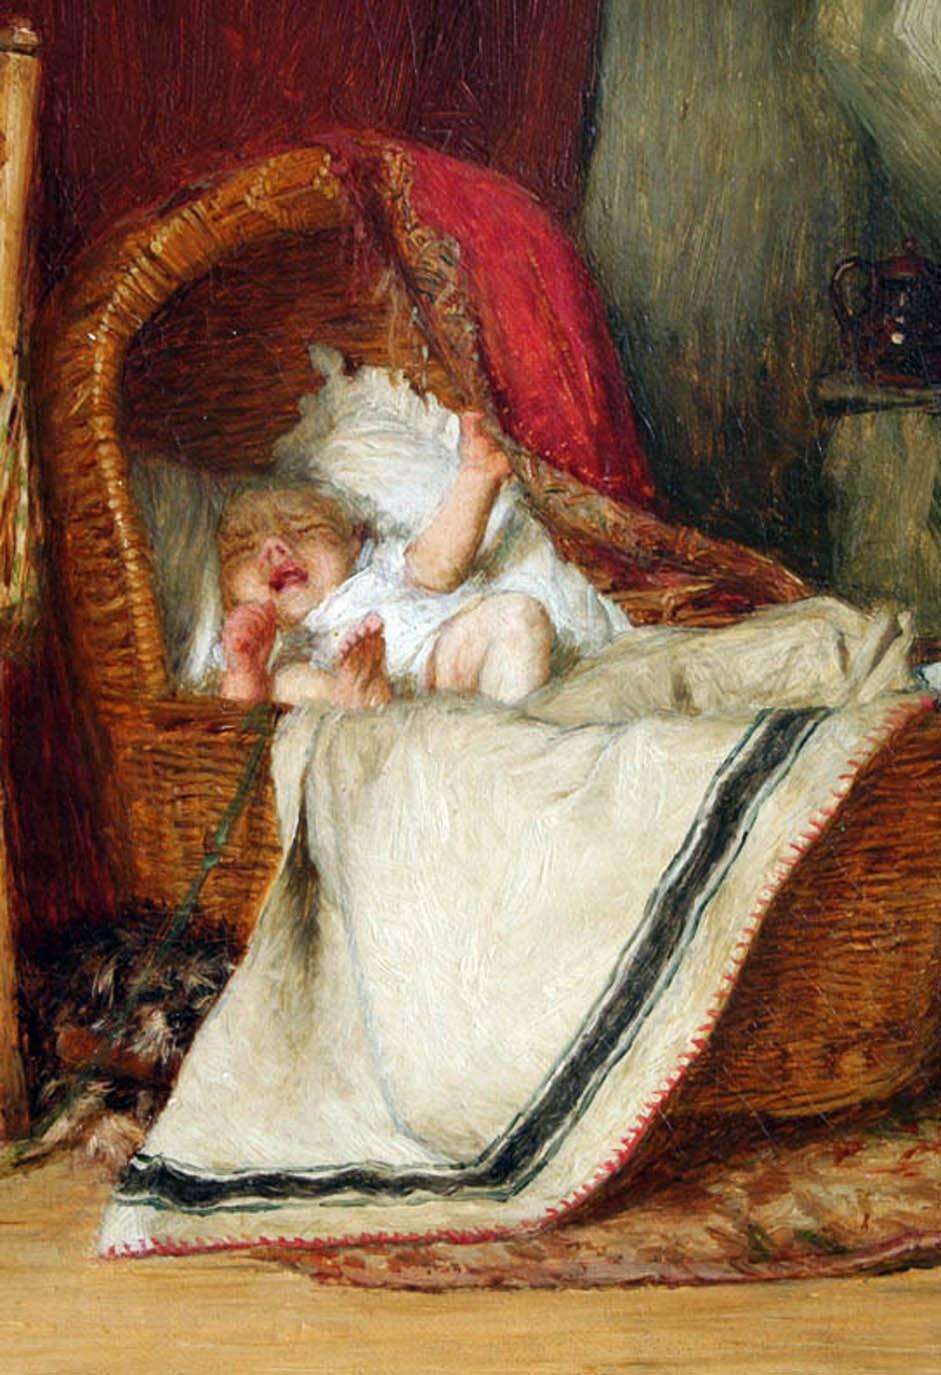 John Burr  (Scots English, 1831-1893)

Young Girl Caught Napping with Crying Baby

Oil on canvas, signed lower left and dated: “1867”

Painting size:  15.5” x 26.5”
Frame size:  22.5” x 33”

A student of Scotish artist, Scott Lauder, John